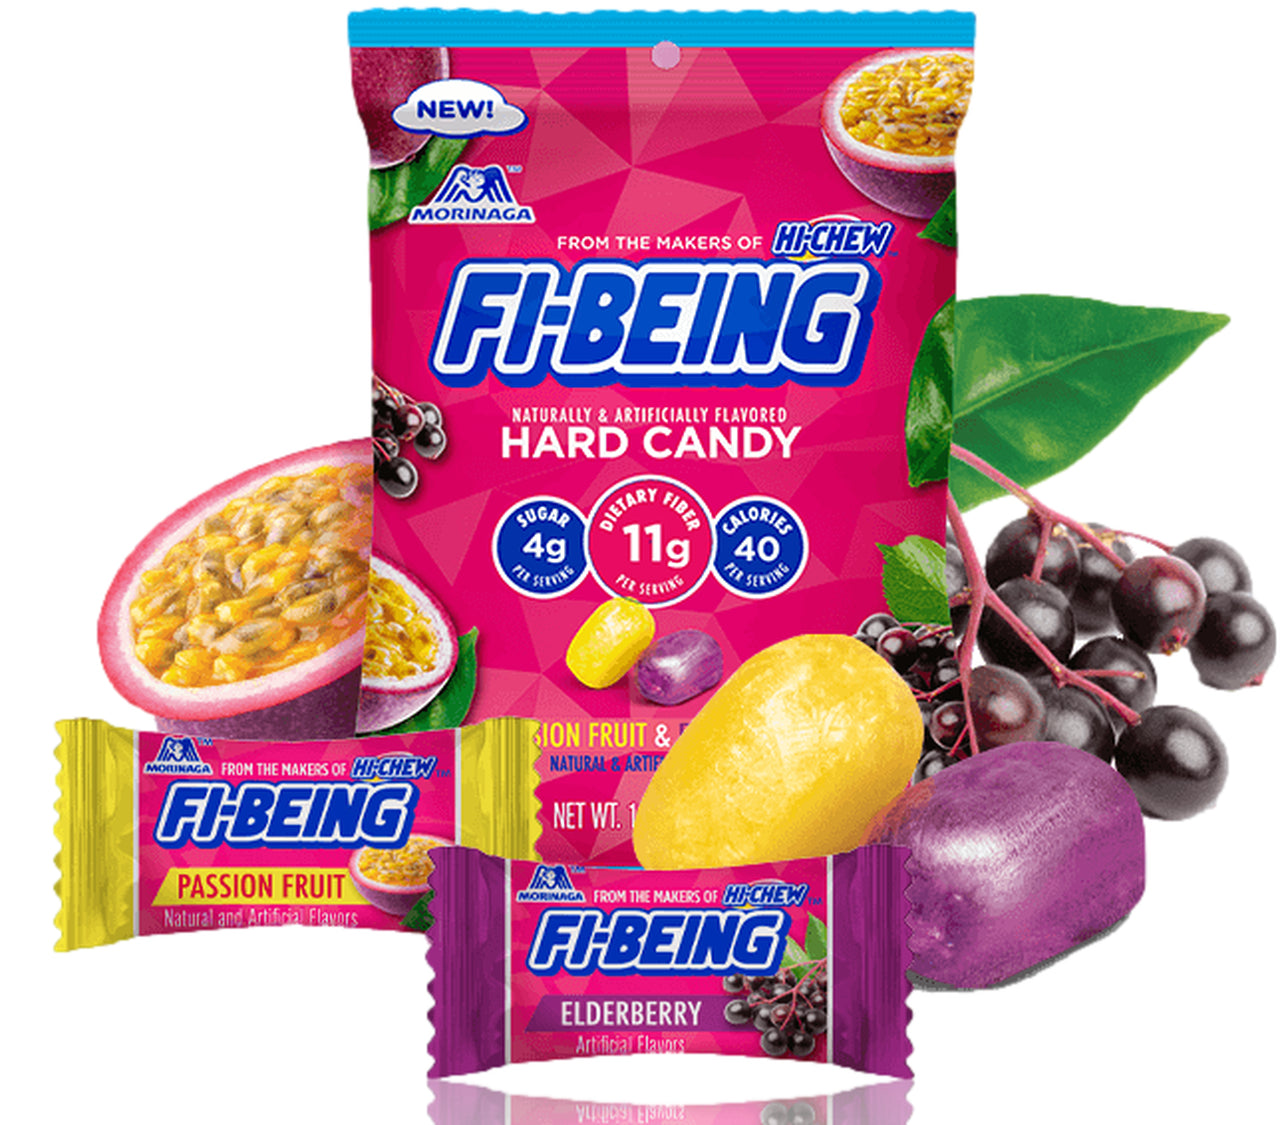 HI-CHEW Fi-Being Hard Candy Passion Fruit & Elderberry